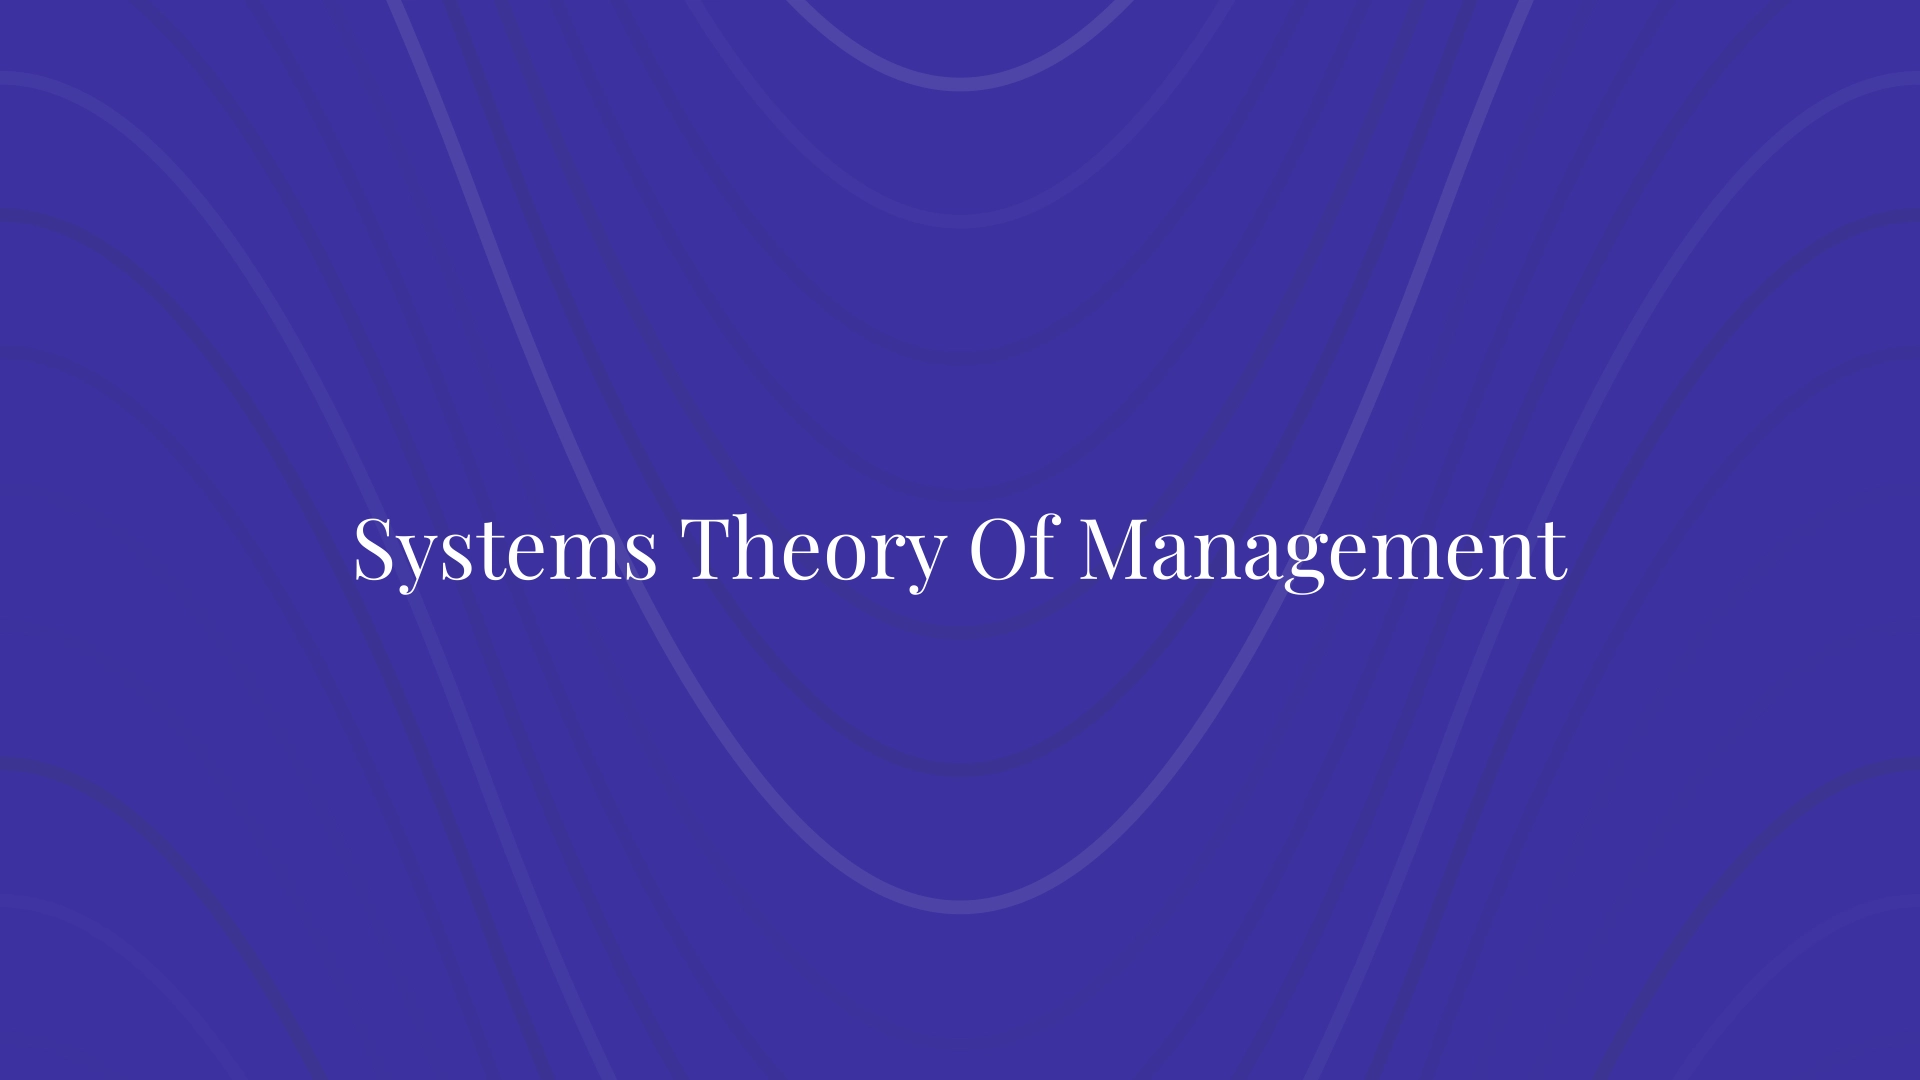 Systems Theory Of Management